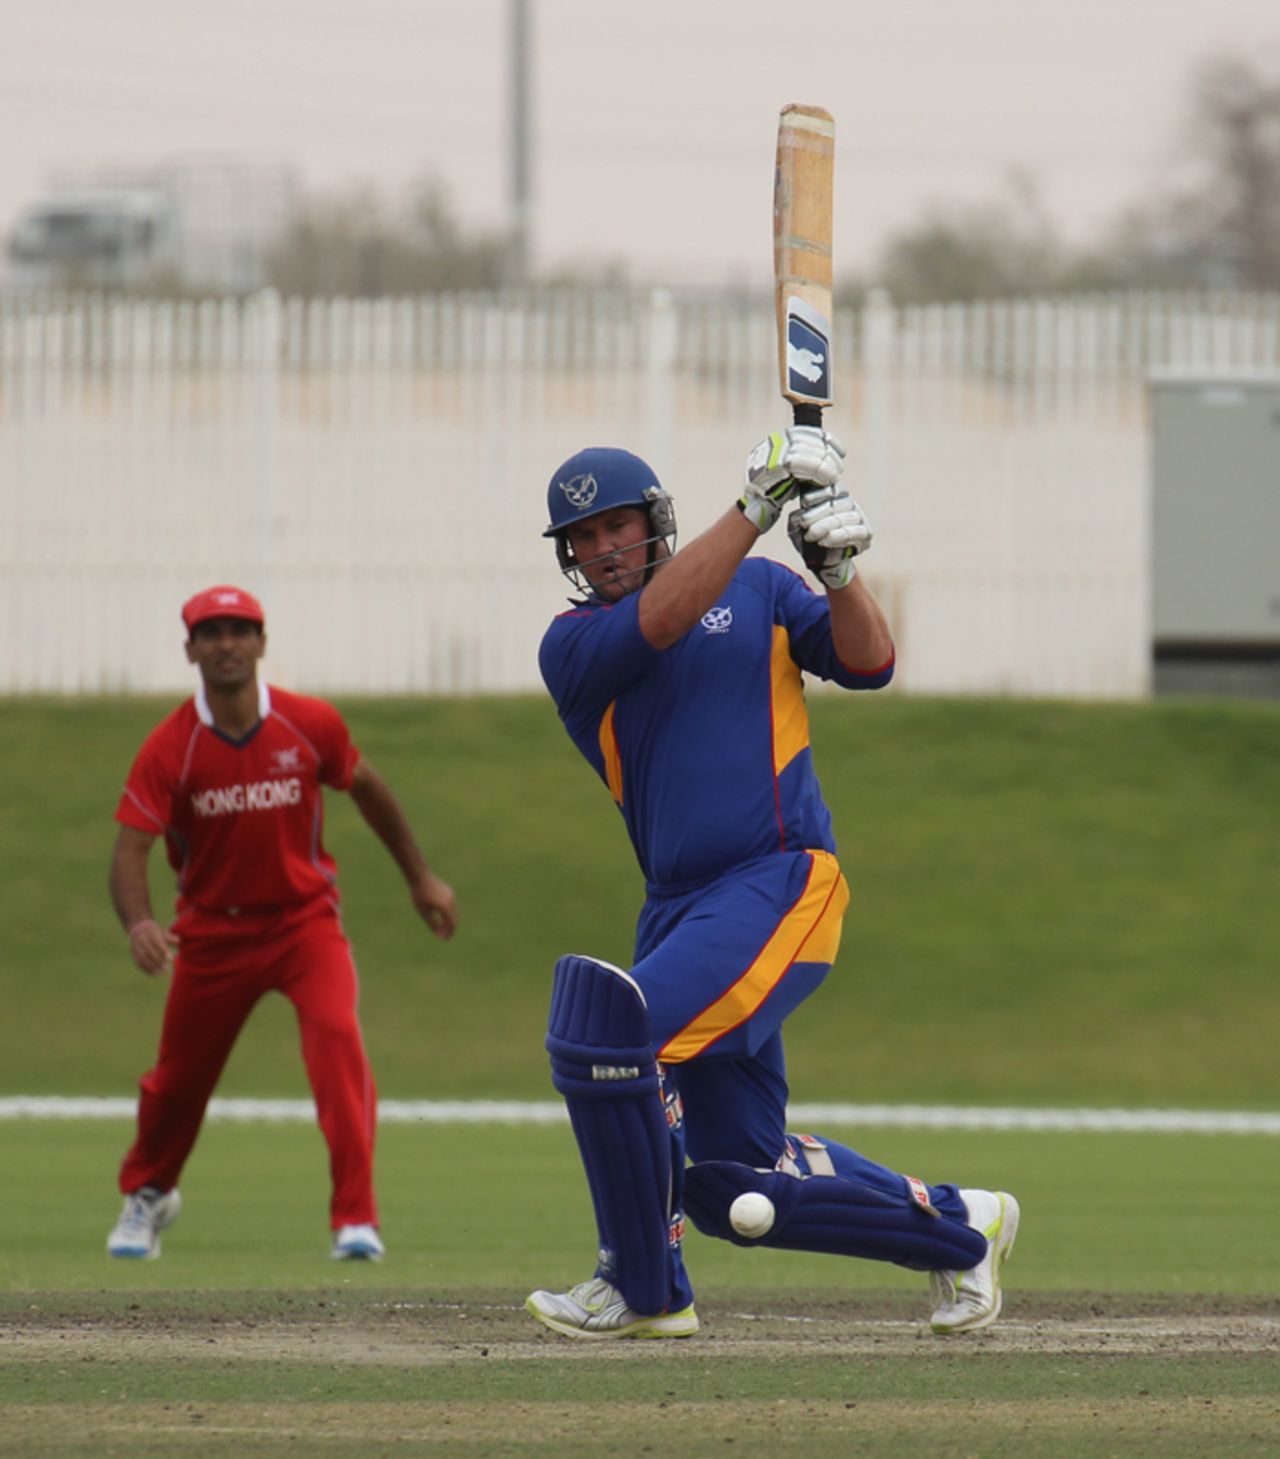 AJ Burger slugs a boundary through mid-wicktet for Namibia XI against Hong Kong XI in a WCL2 warm-up game at the Emirates Sevens ground on 5th April 2011